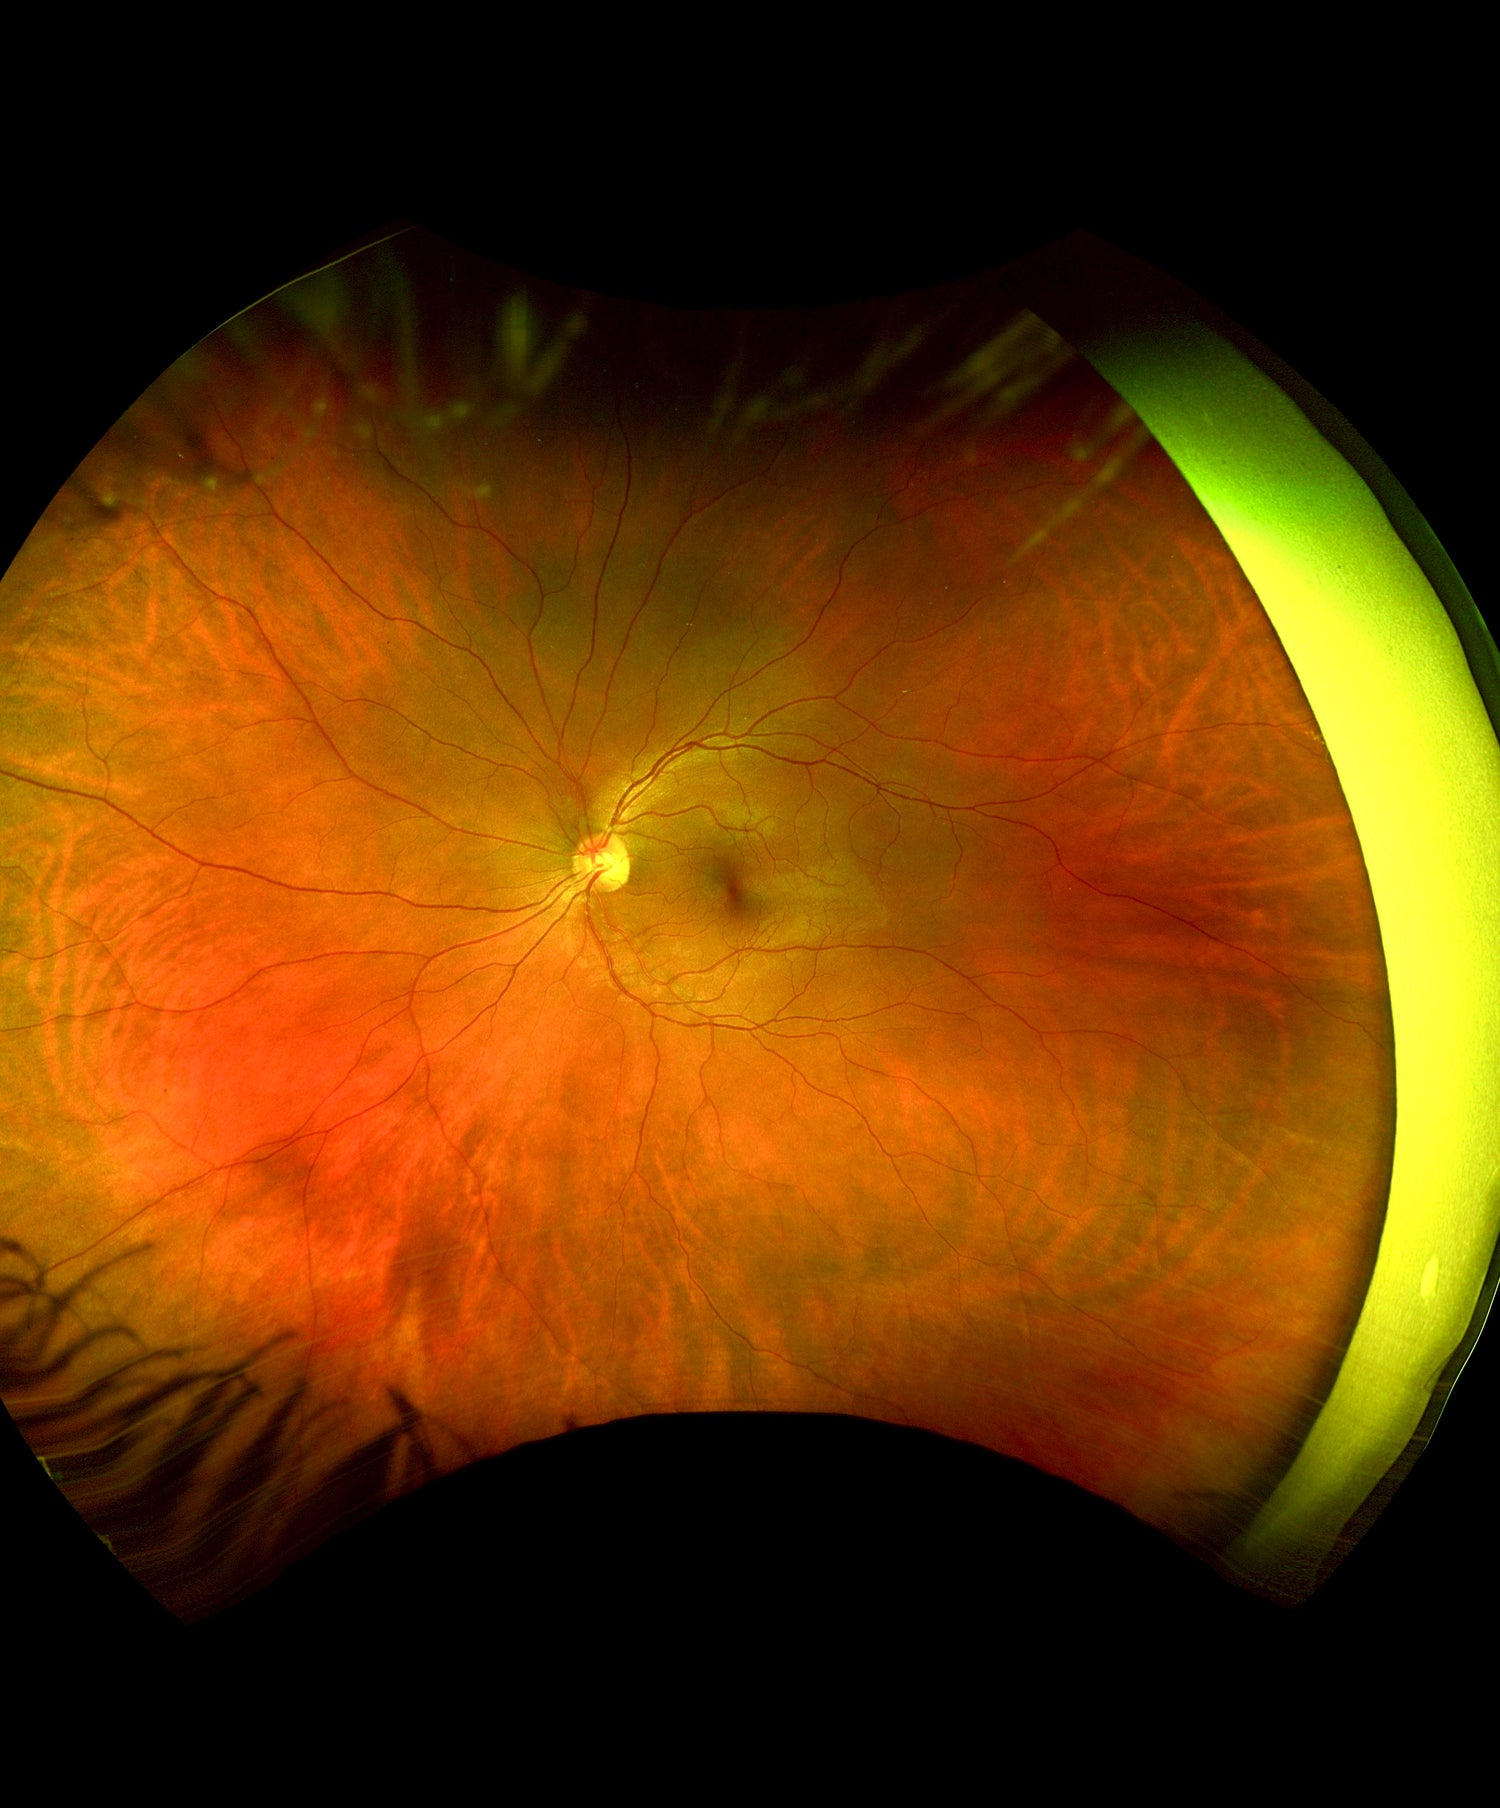 Digital image of the inside of an eye, showing the retina, optic nerve and blood vessels.